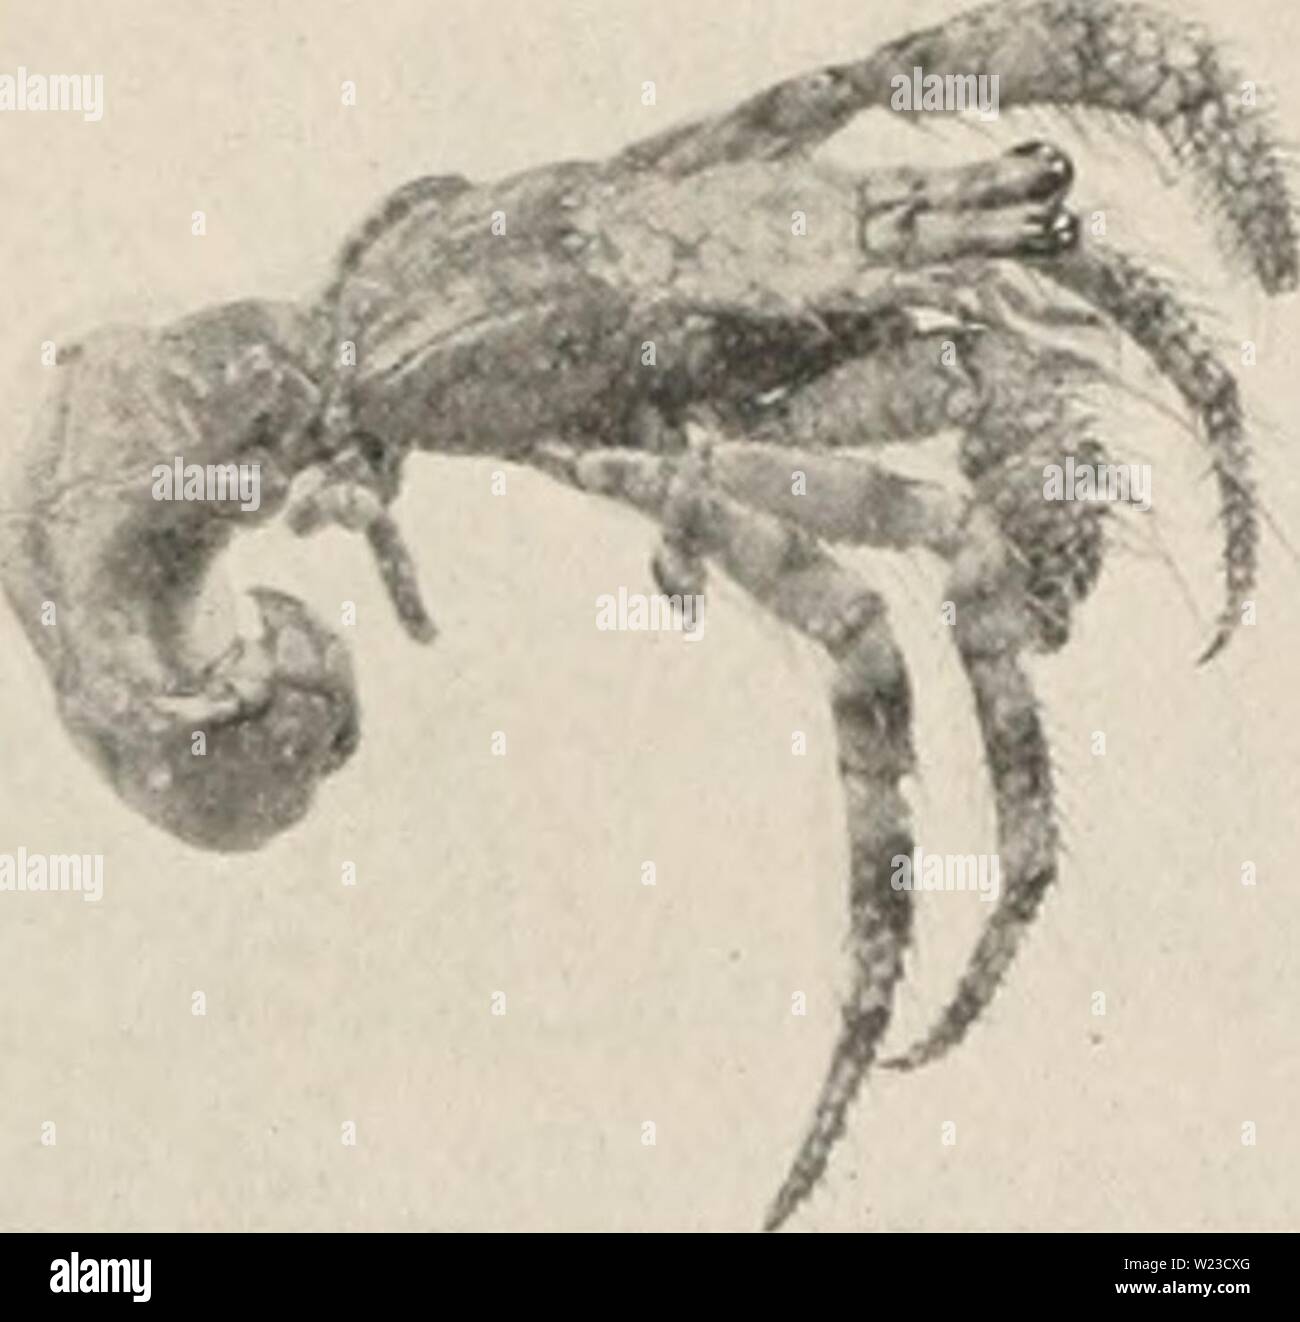 Archive image from page 154 of Decapod crustacea of Bermuda (1908-1922). Decapod crustacea of Bermuda  decapodcrustacea00verr Year: 1908-1922  A. E. V err ill—Decapod Crustacea of Bermuda. 1 i:, of the chelipeds and leg's are seen to l&gt;e covered with a reticulation of narrow, bright red lines, which generally, also, surround and mark out the paler colored tubercles and s|&gt;inules, hut they may also form a network of small polygons on the smooth surfaces. When the chehe and tubercles are red, as in some of the larger specimens, these lines become dark n-d, but are less conspicuous, especia Stock Photo